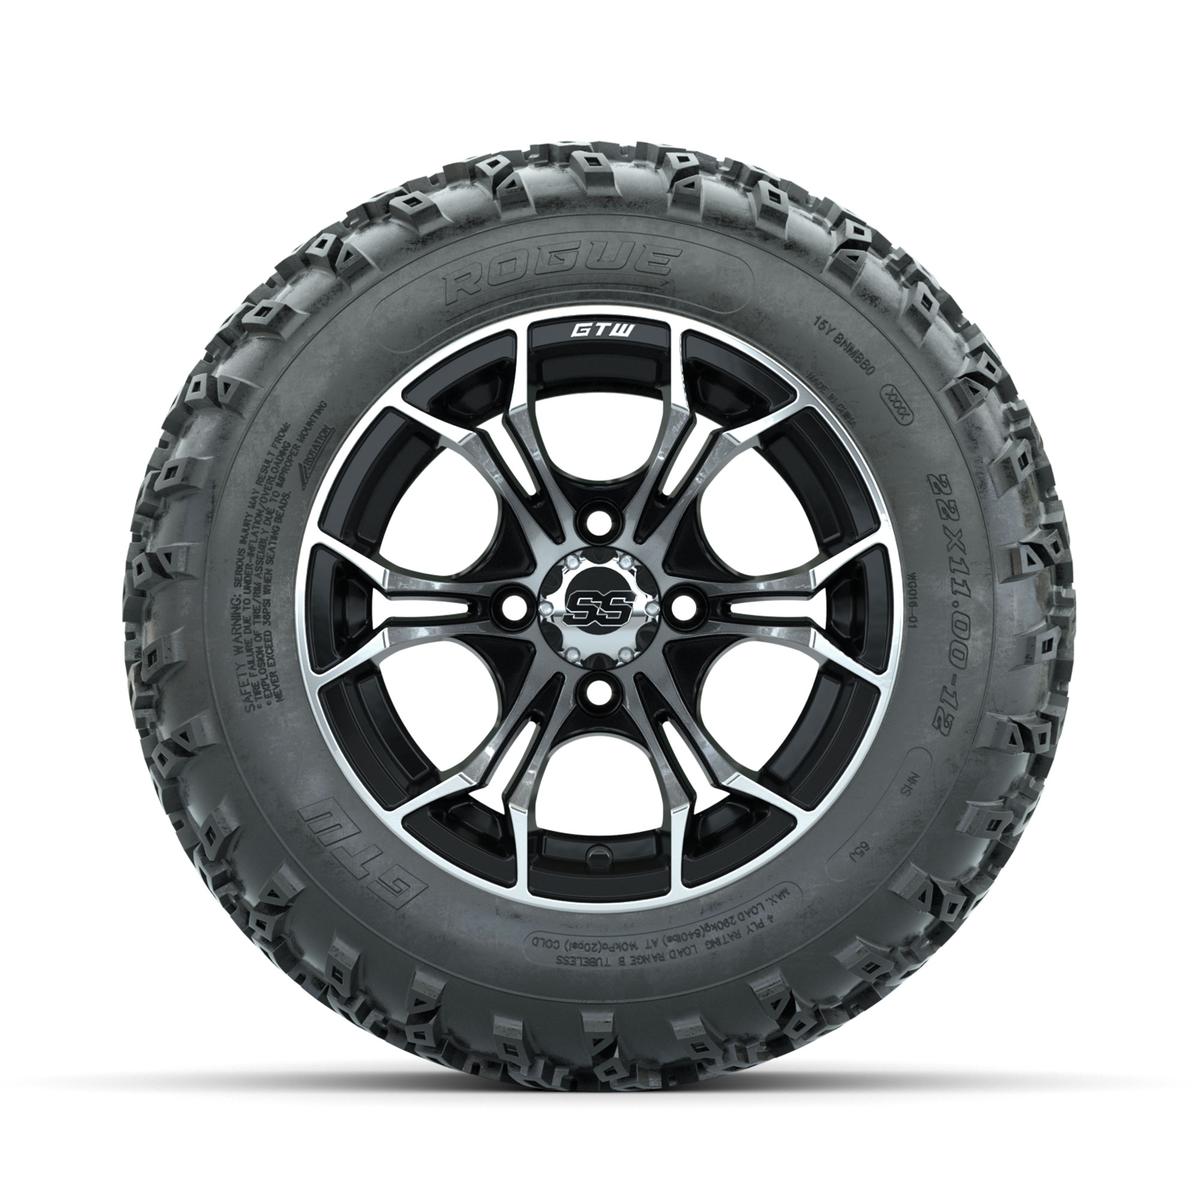 GTW Spyder Machined/Black 12 in Wheels with 22x11.00-12 Rogue All Terrain Tires – Full Set